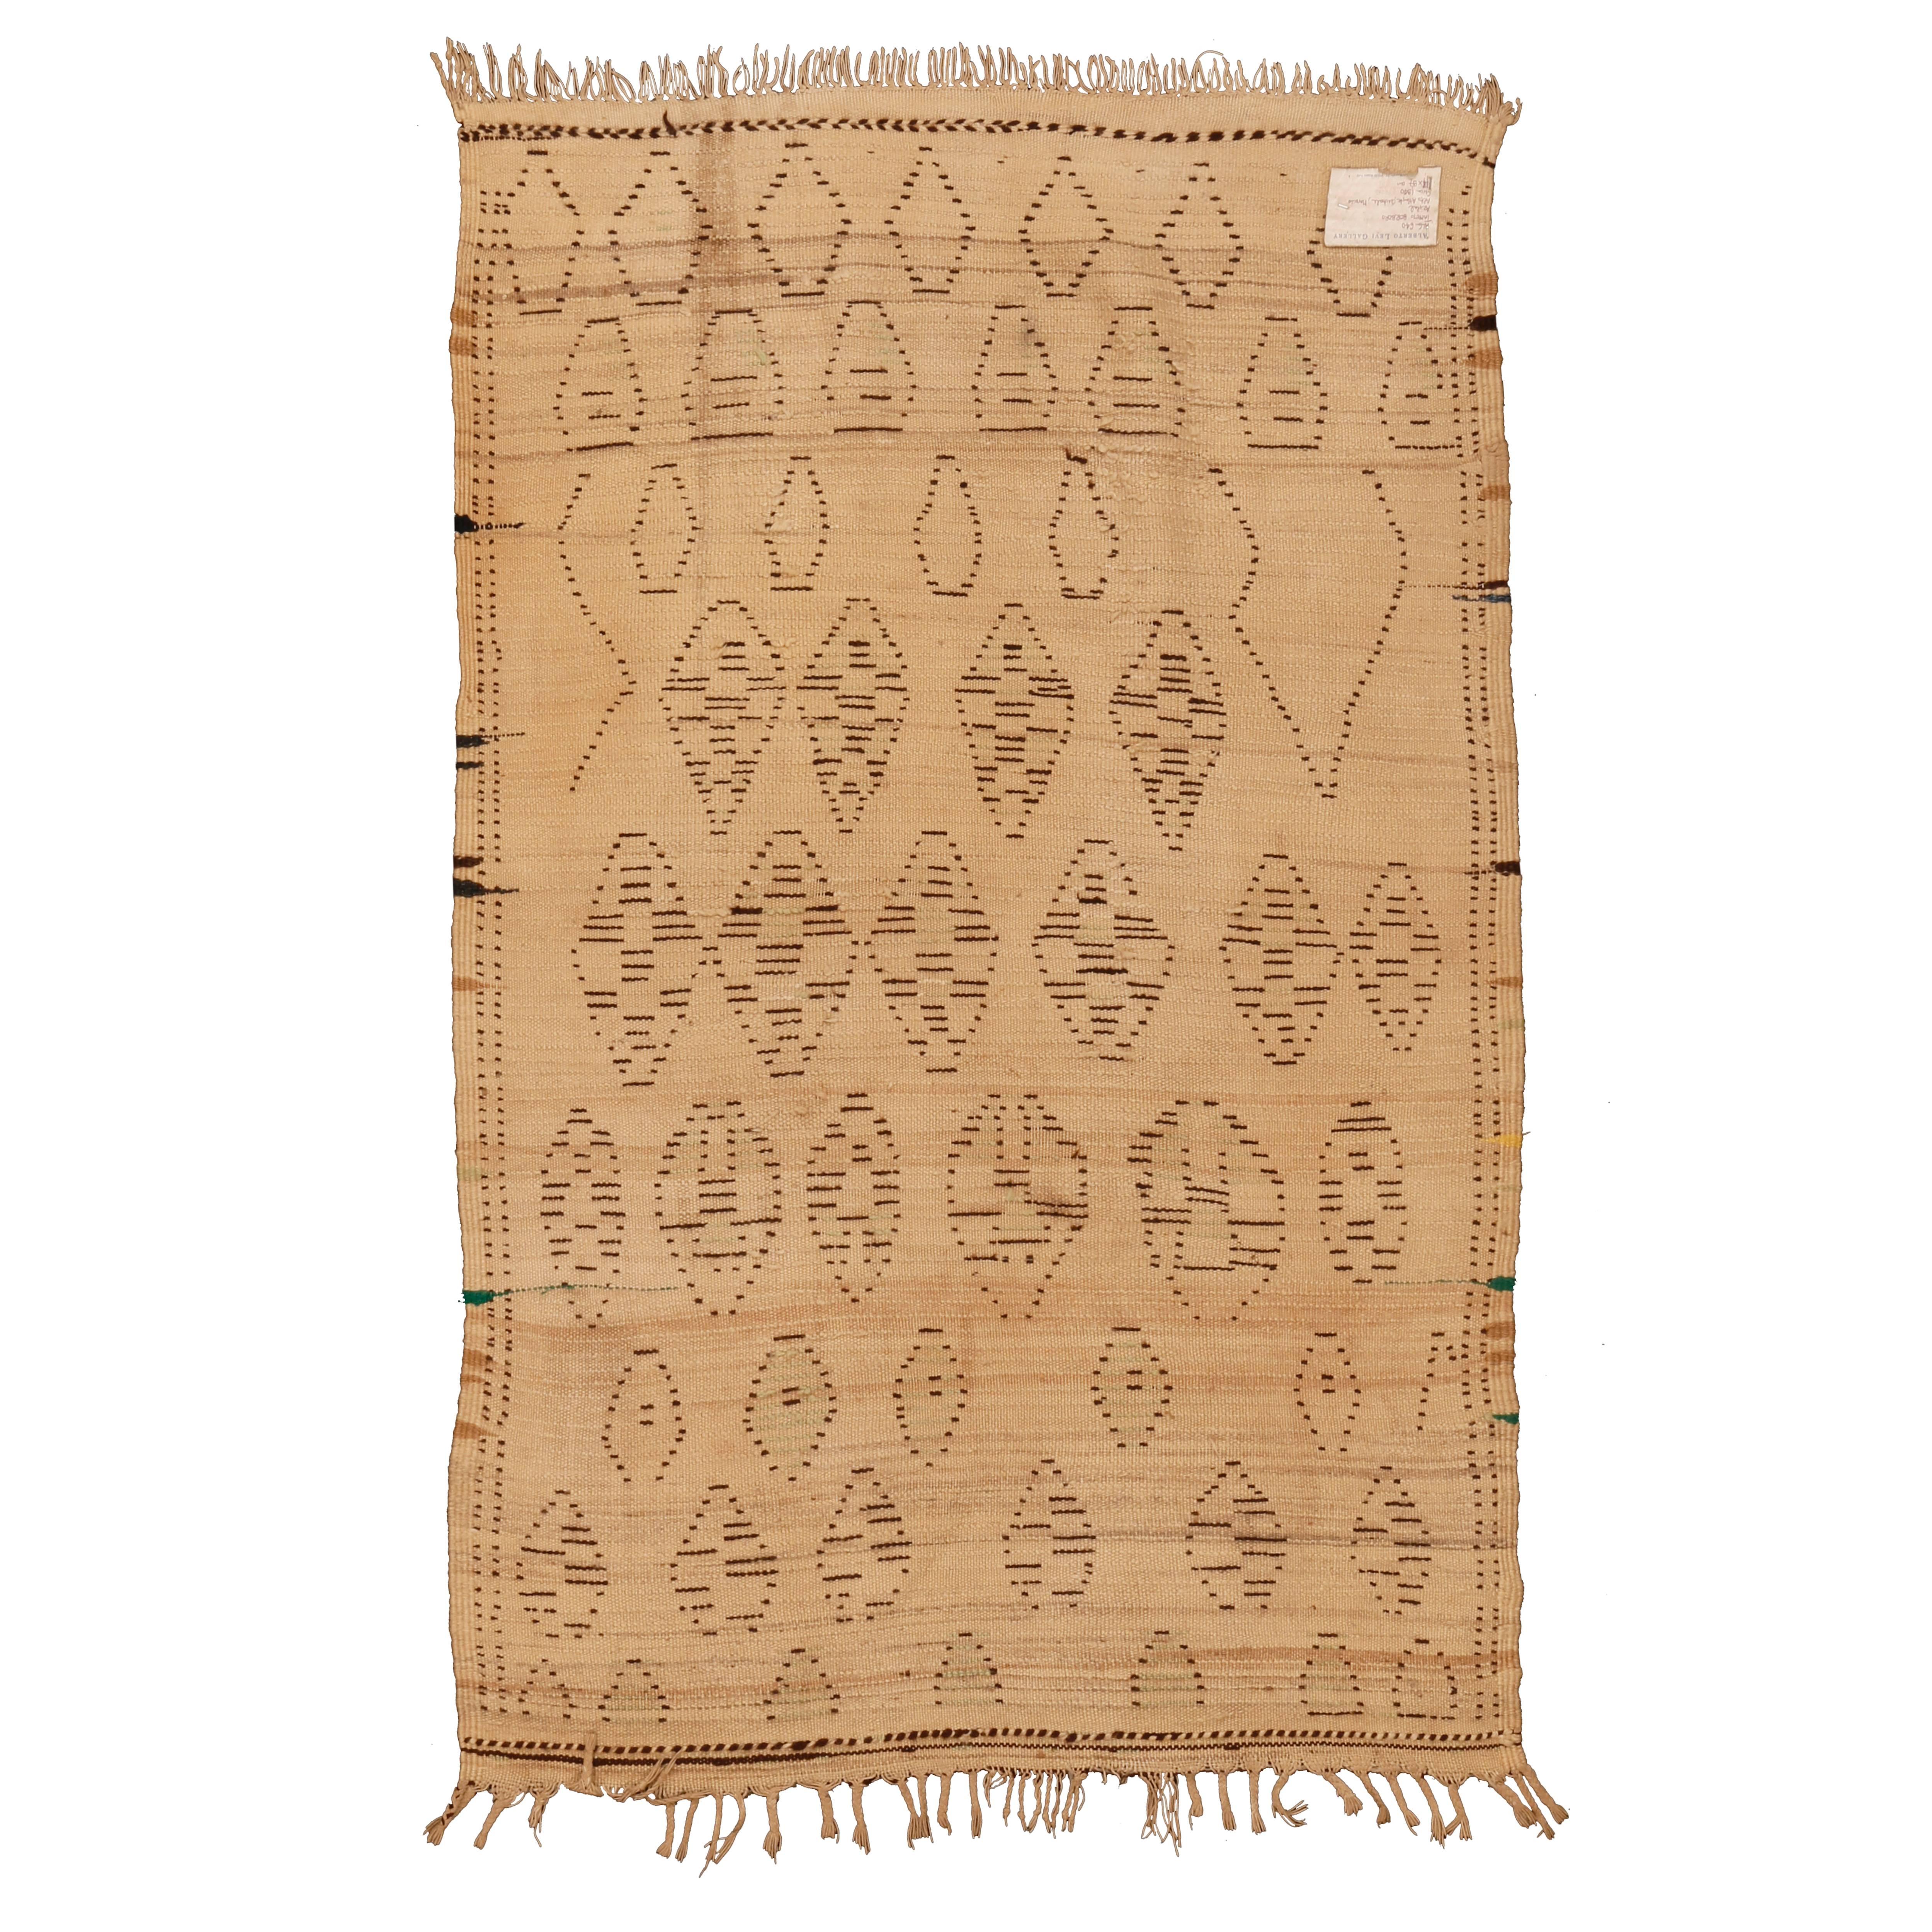 Woven with natural, undyed wool, this rug belongs to the earliest group of Azilal weavings and the first ones to appear on the market around the turn of the Millennium. Azilal rugs share some design features with some of the ivory ground weavings